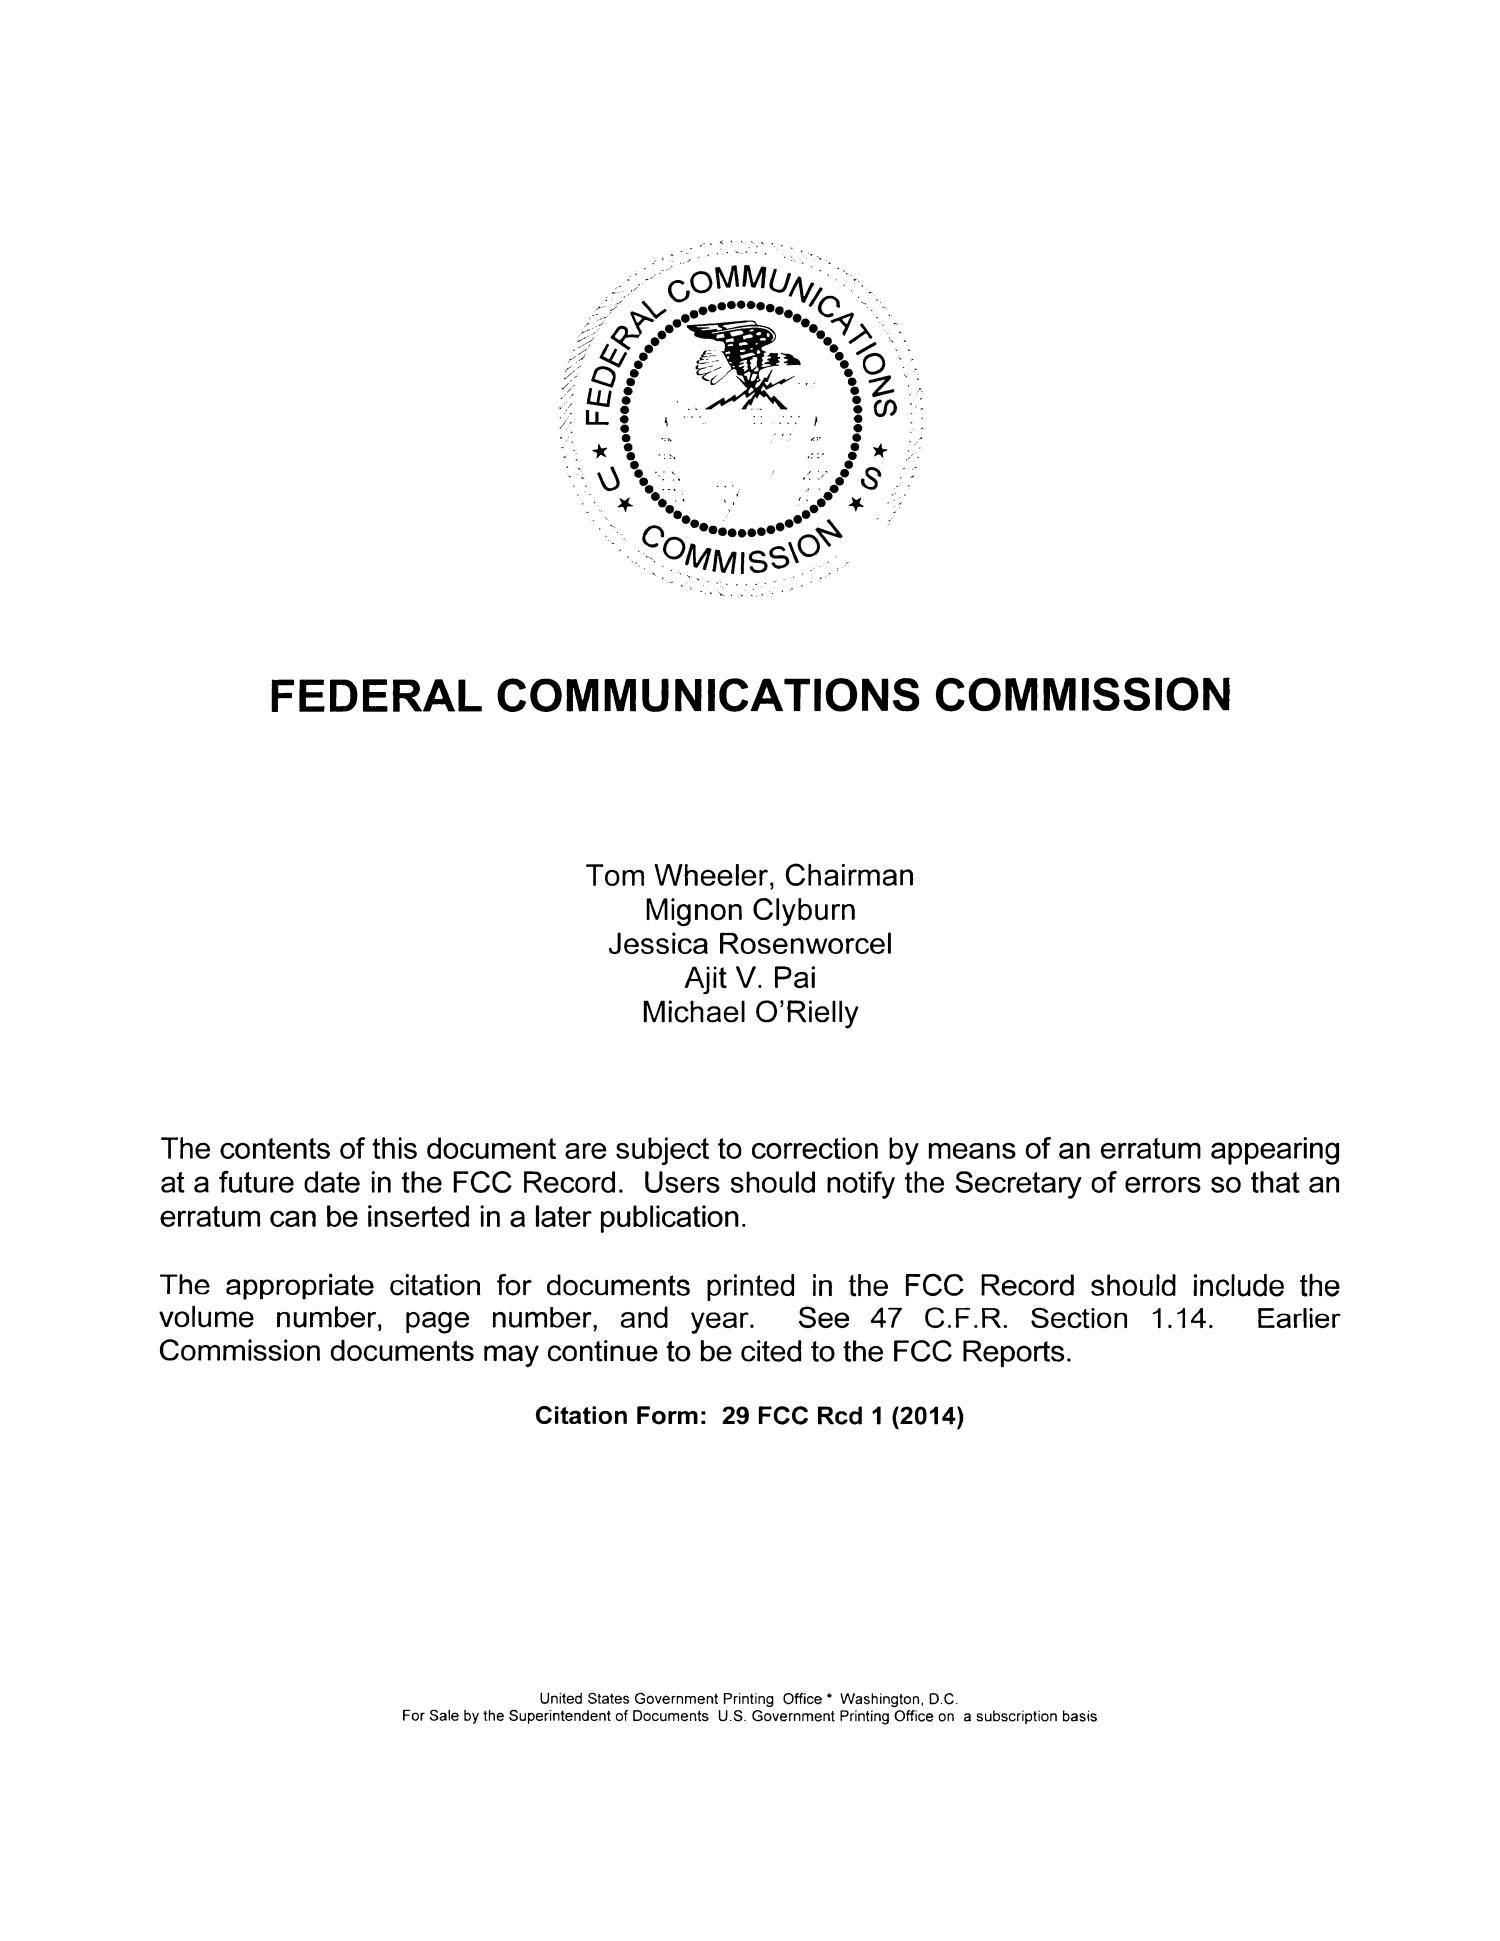 FCC Record, Volume 29, No. 19, Pages 15,111 to 16,051, December 17, 2014 - December 19, 2014
                                                
                                                    Title Page
                                                